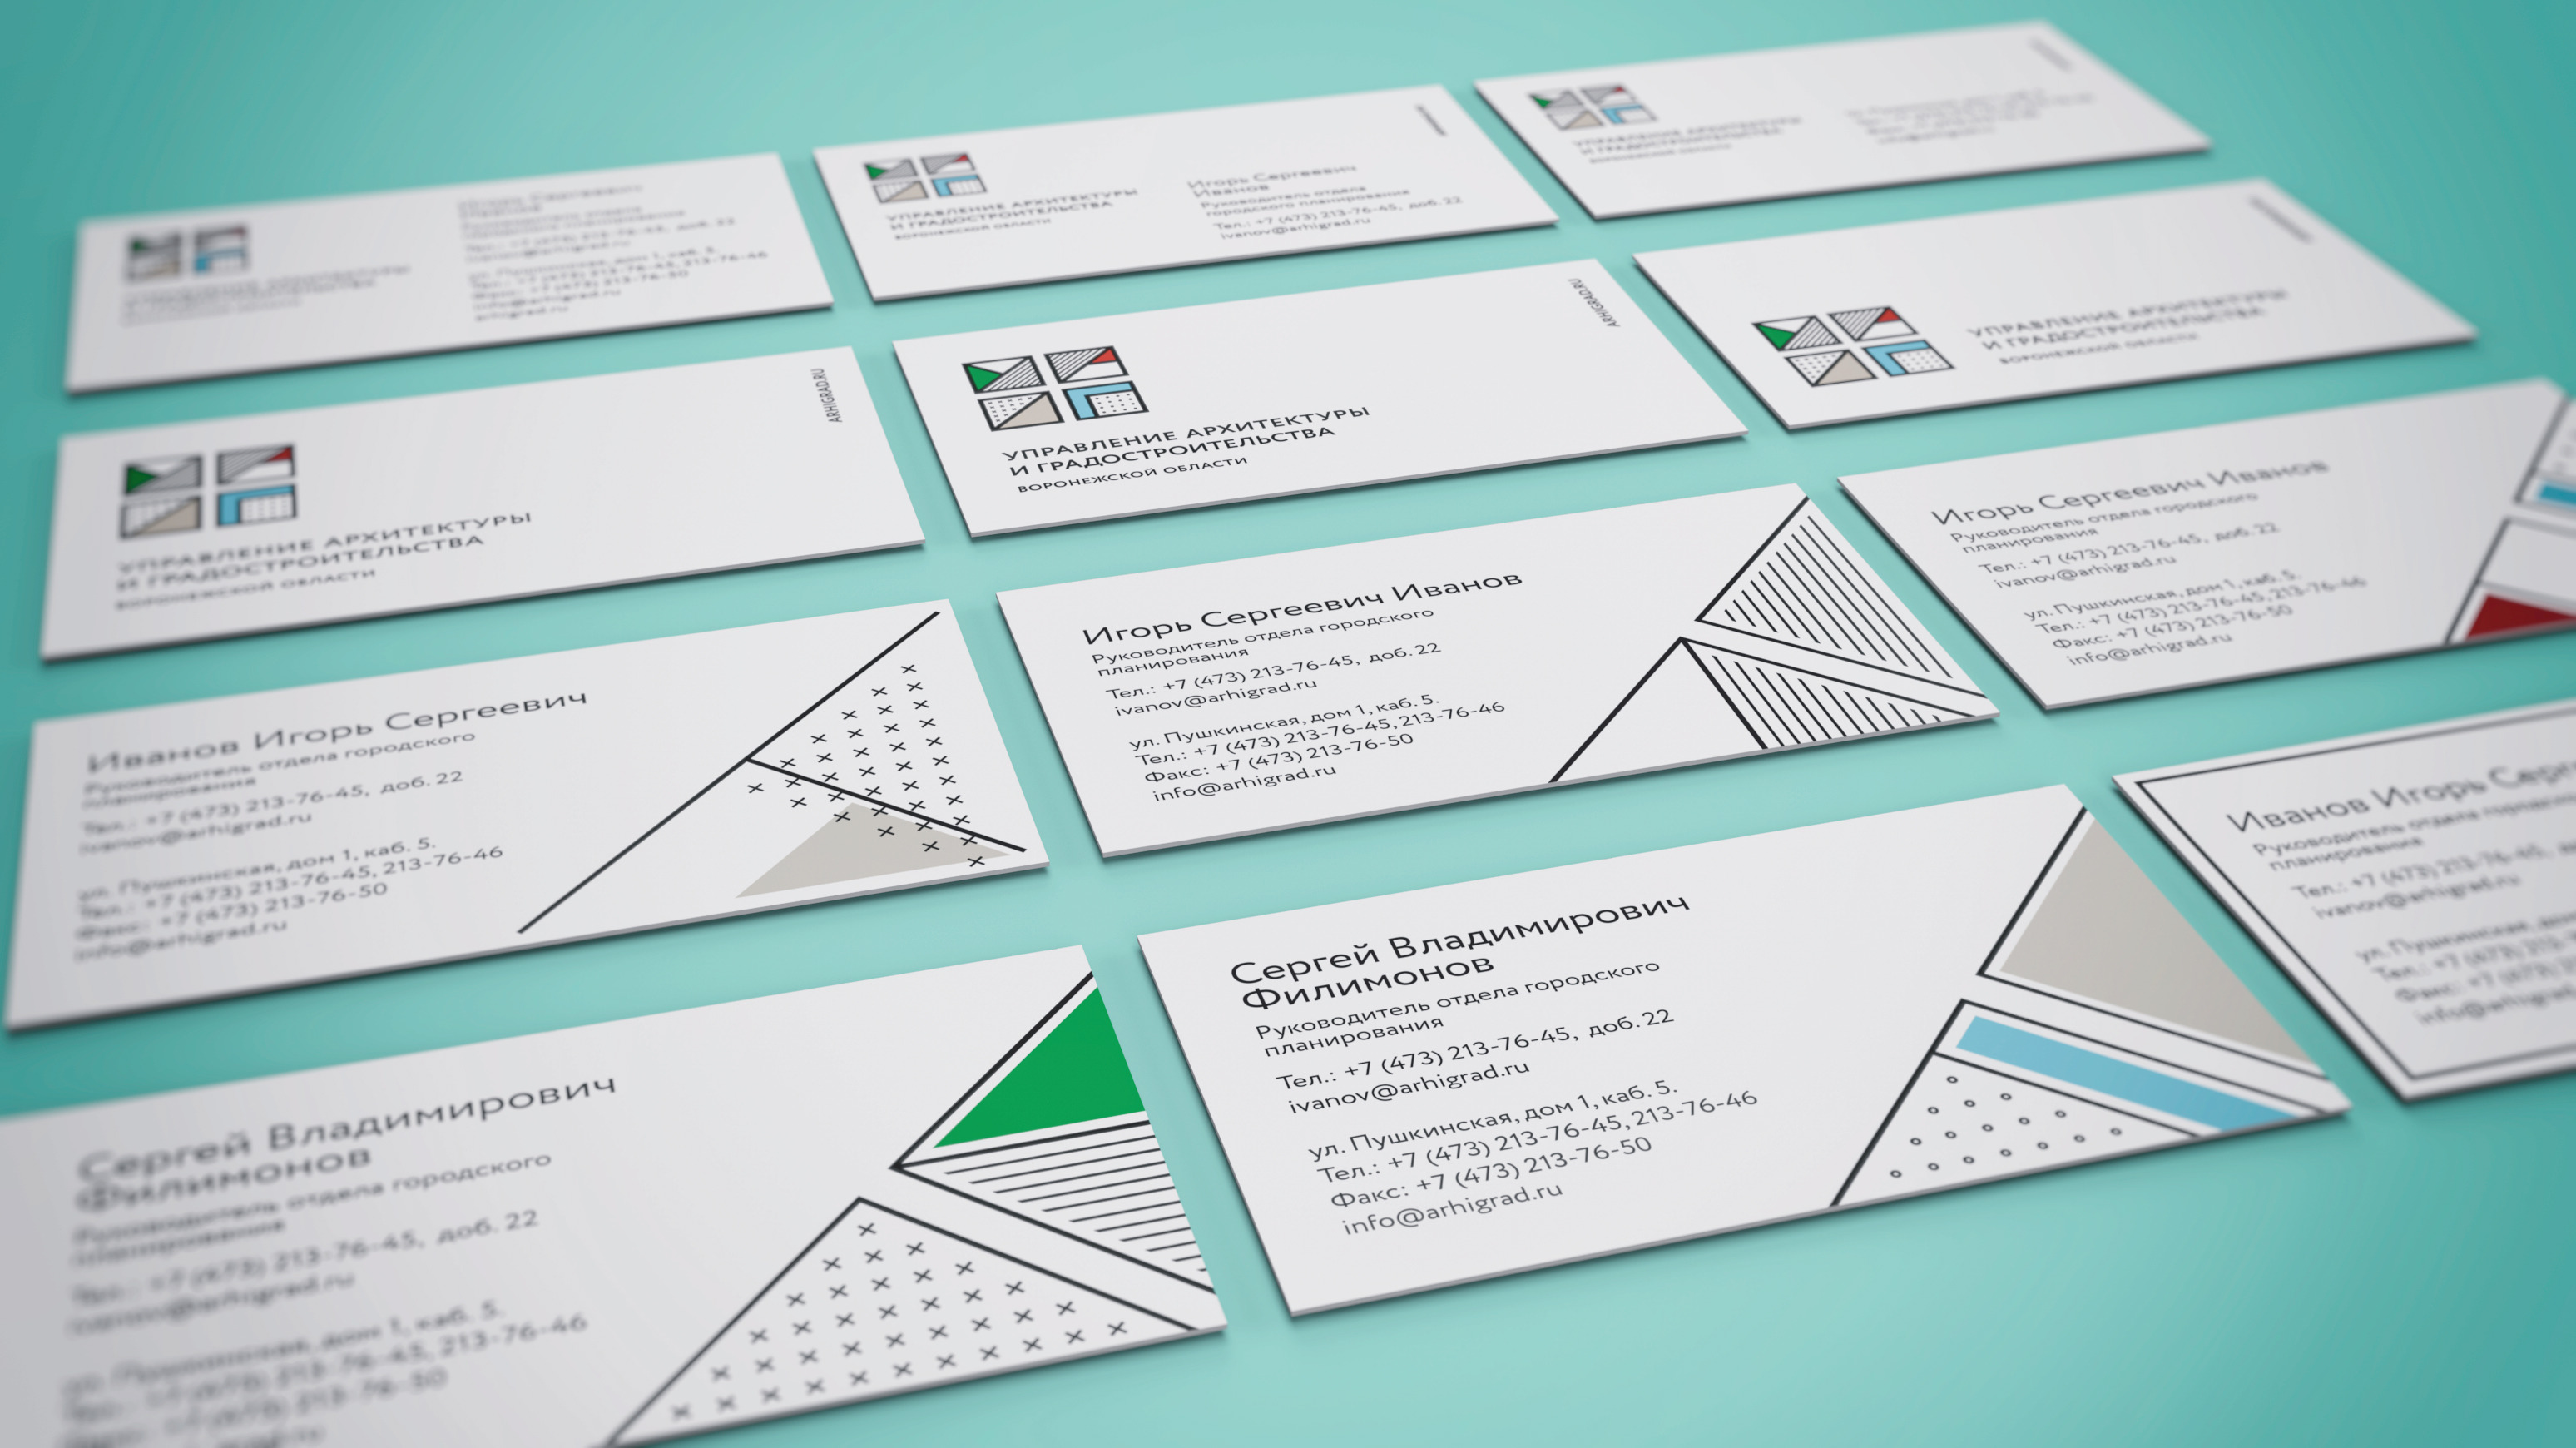 Business cards for the <a href=" http://daup.factorymn.com"> Department of Architecture and Urban Planning</a>.